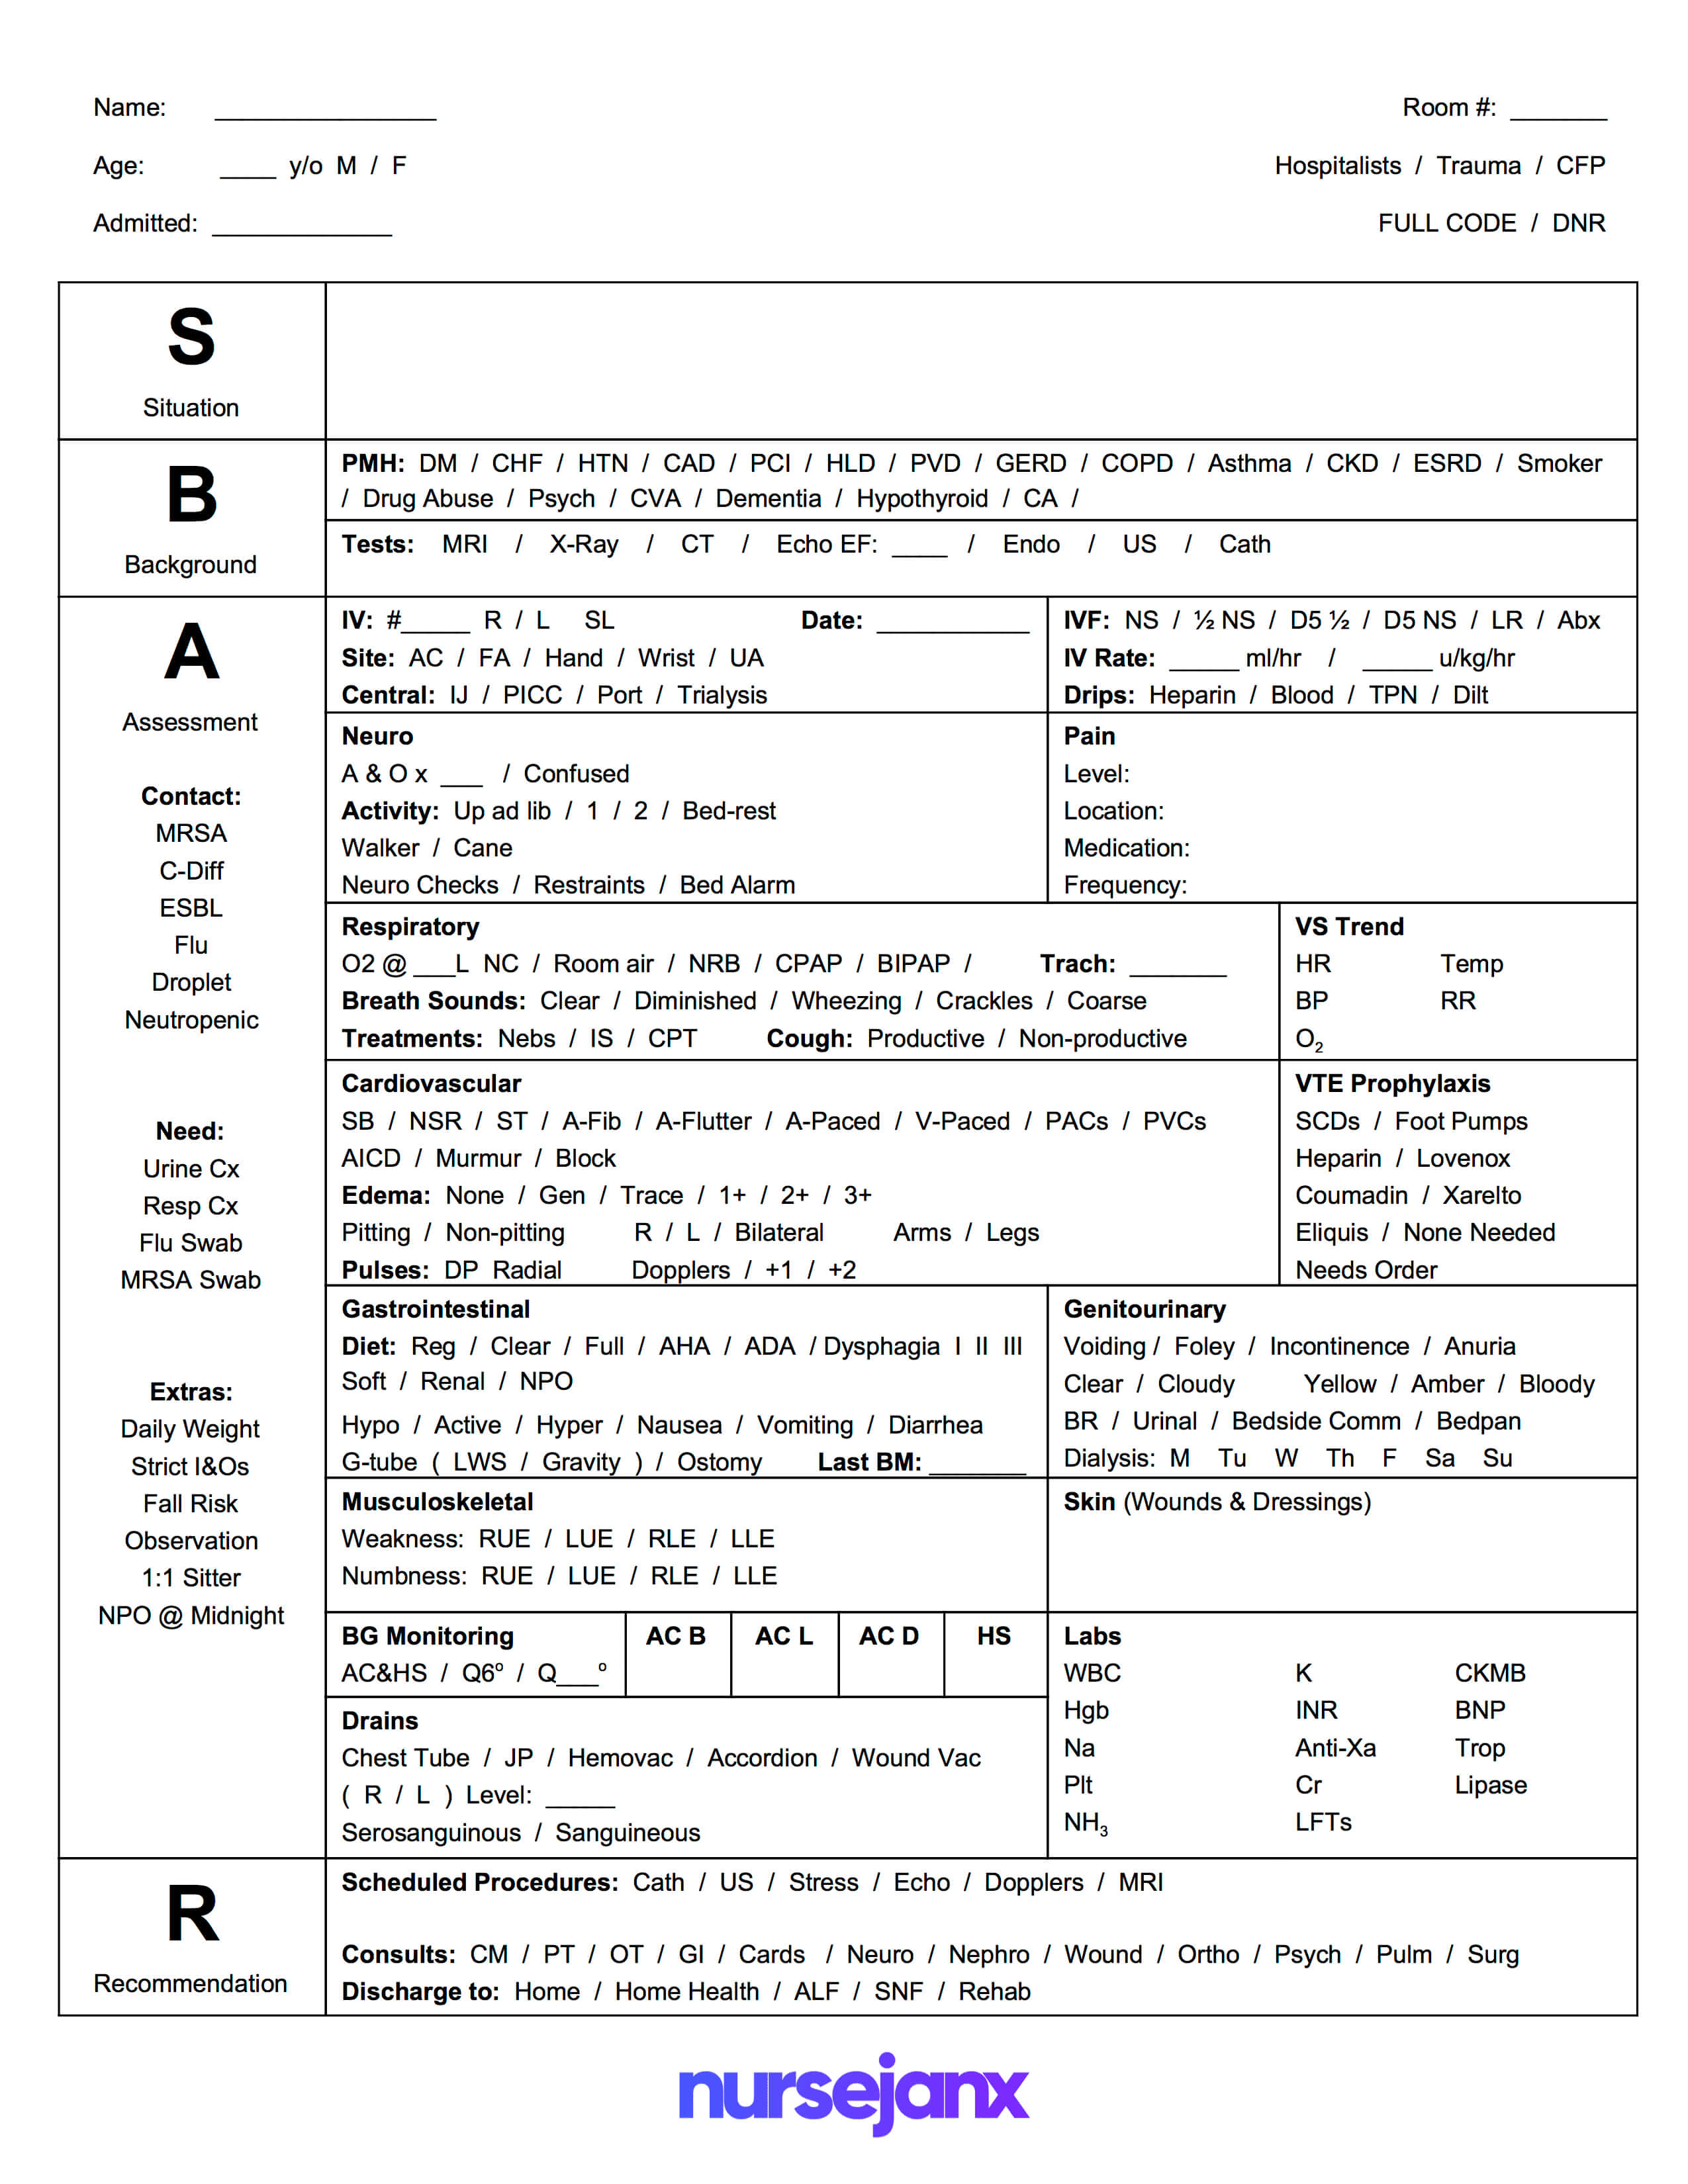 Free Download! This Is A Full Size Sbar Nursing Brain Report In Med Surg Report Sheet Templates